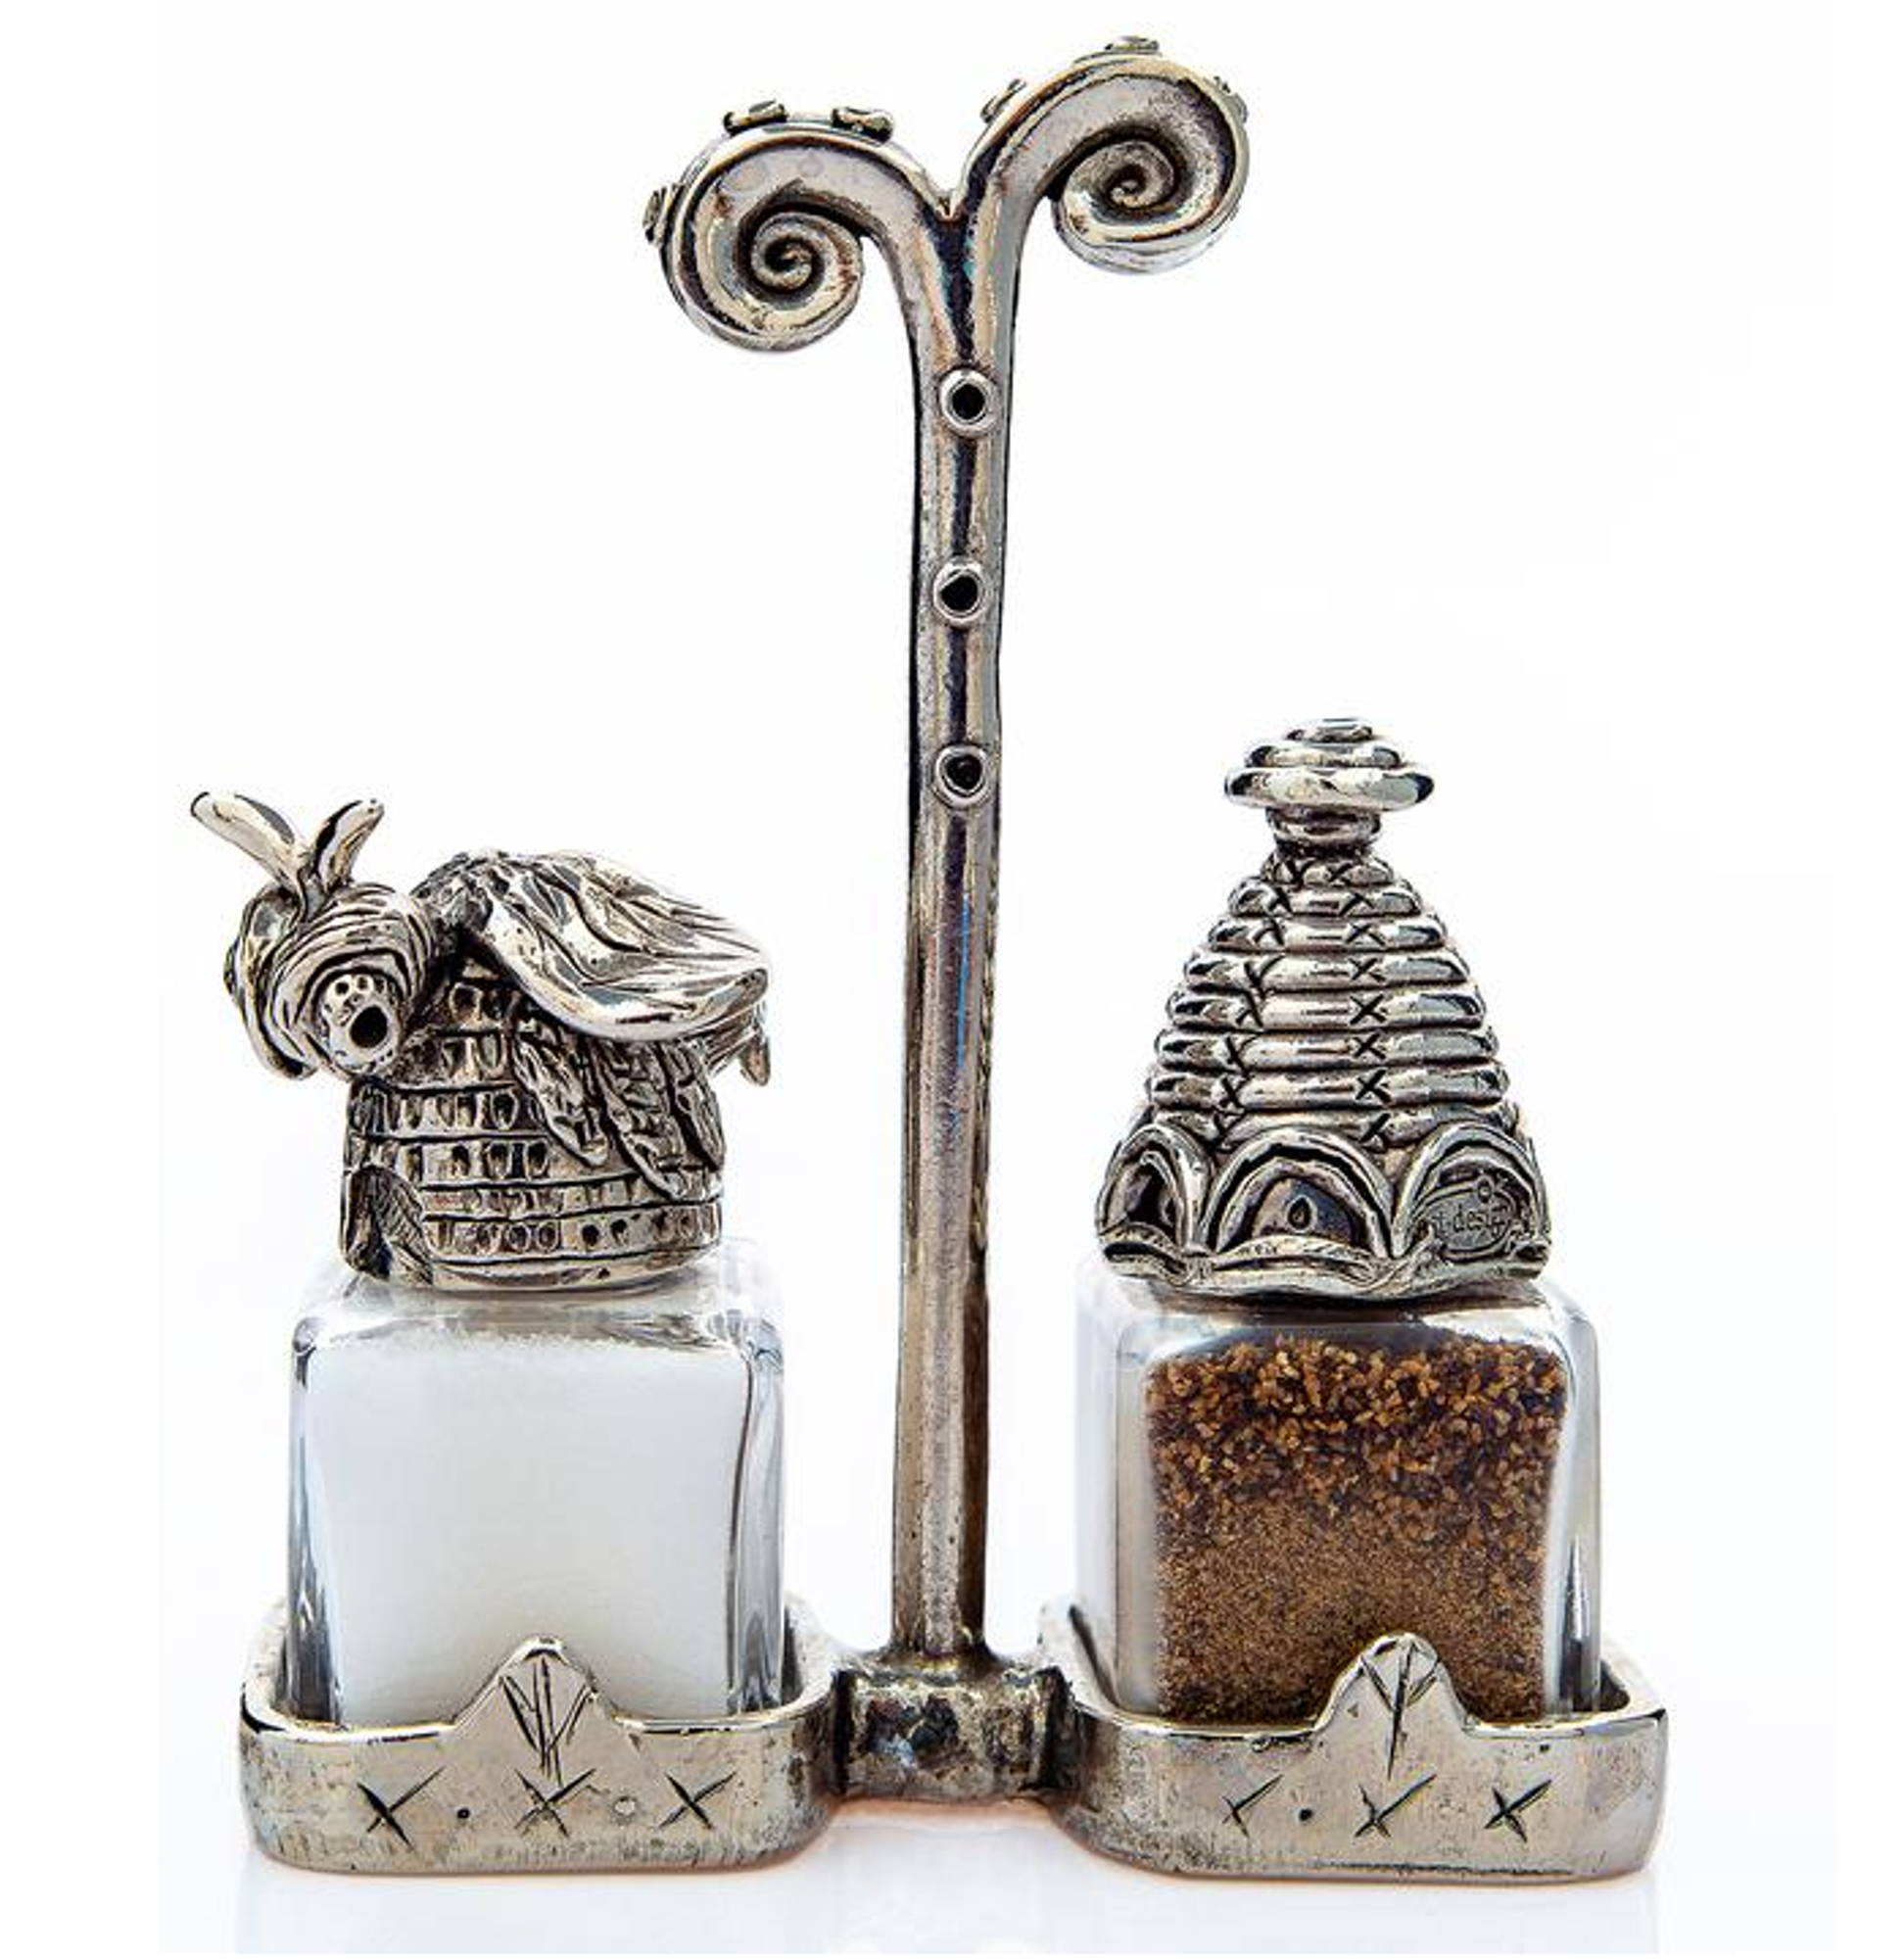 salt and pepper candle